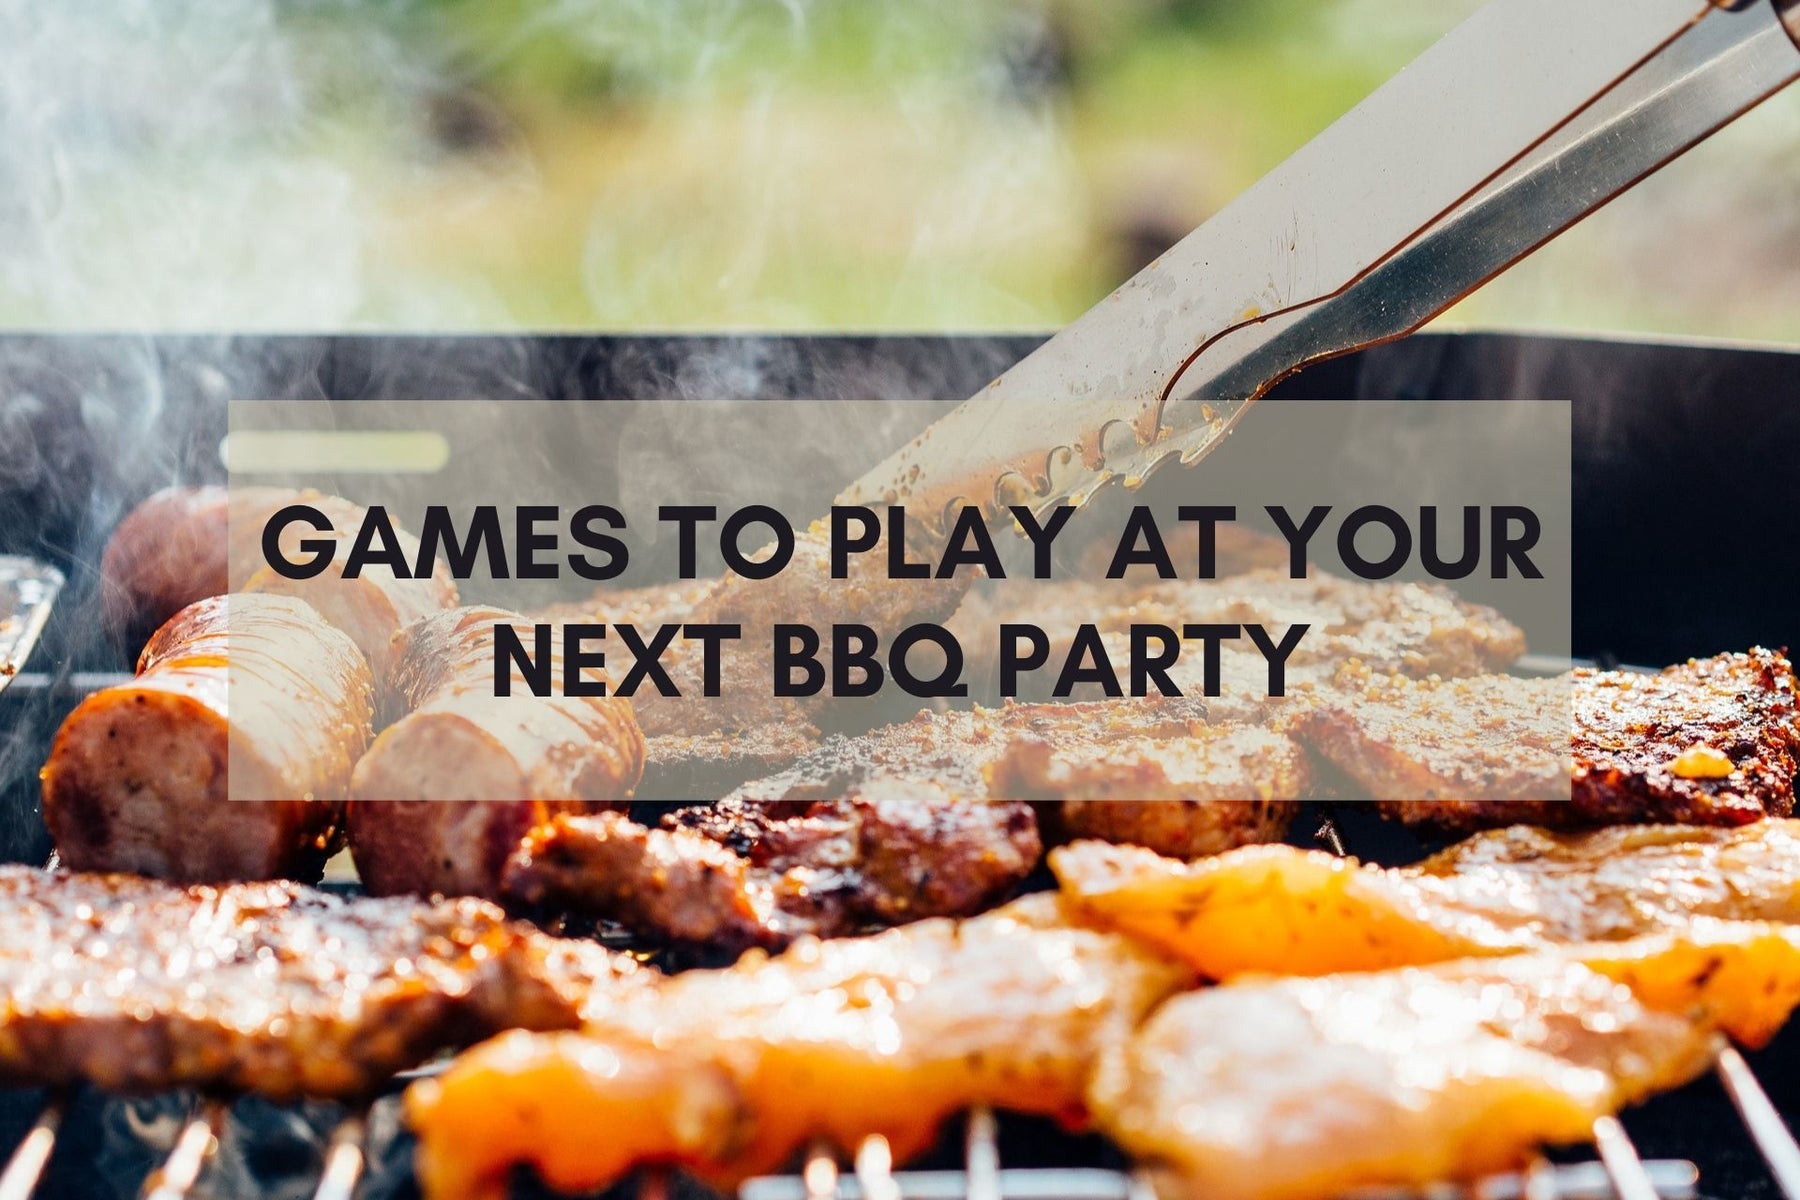 Food - Games to Play at Your Next BBQ Party